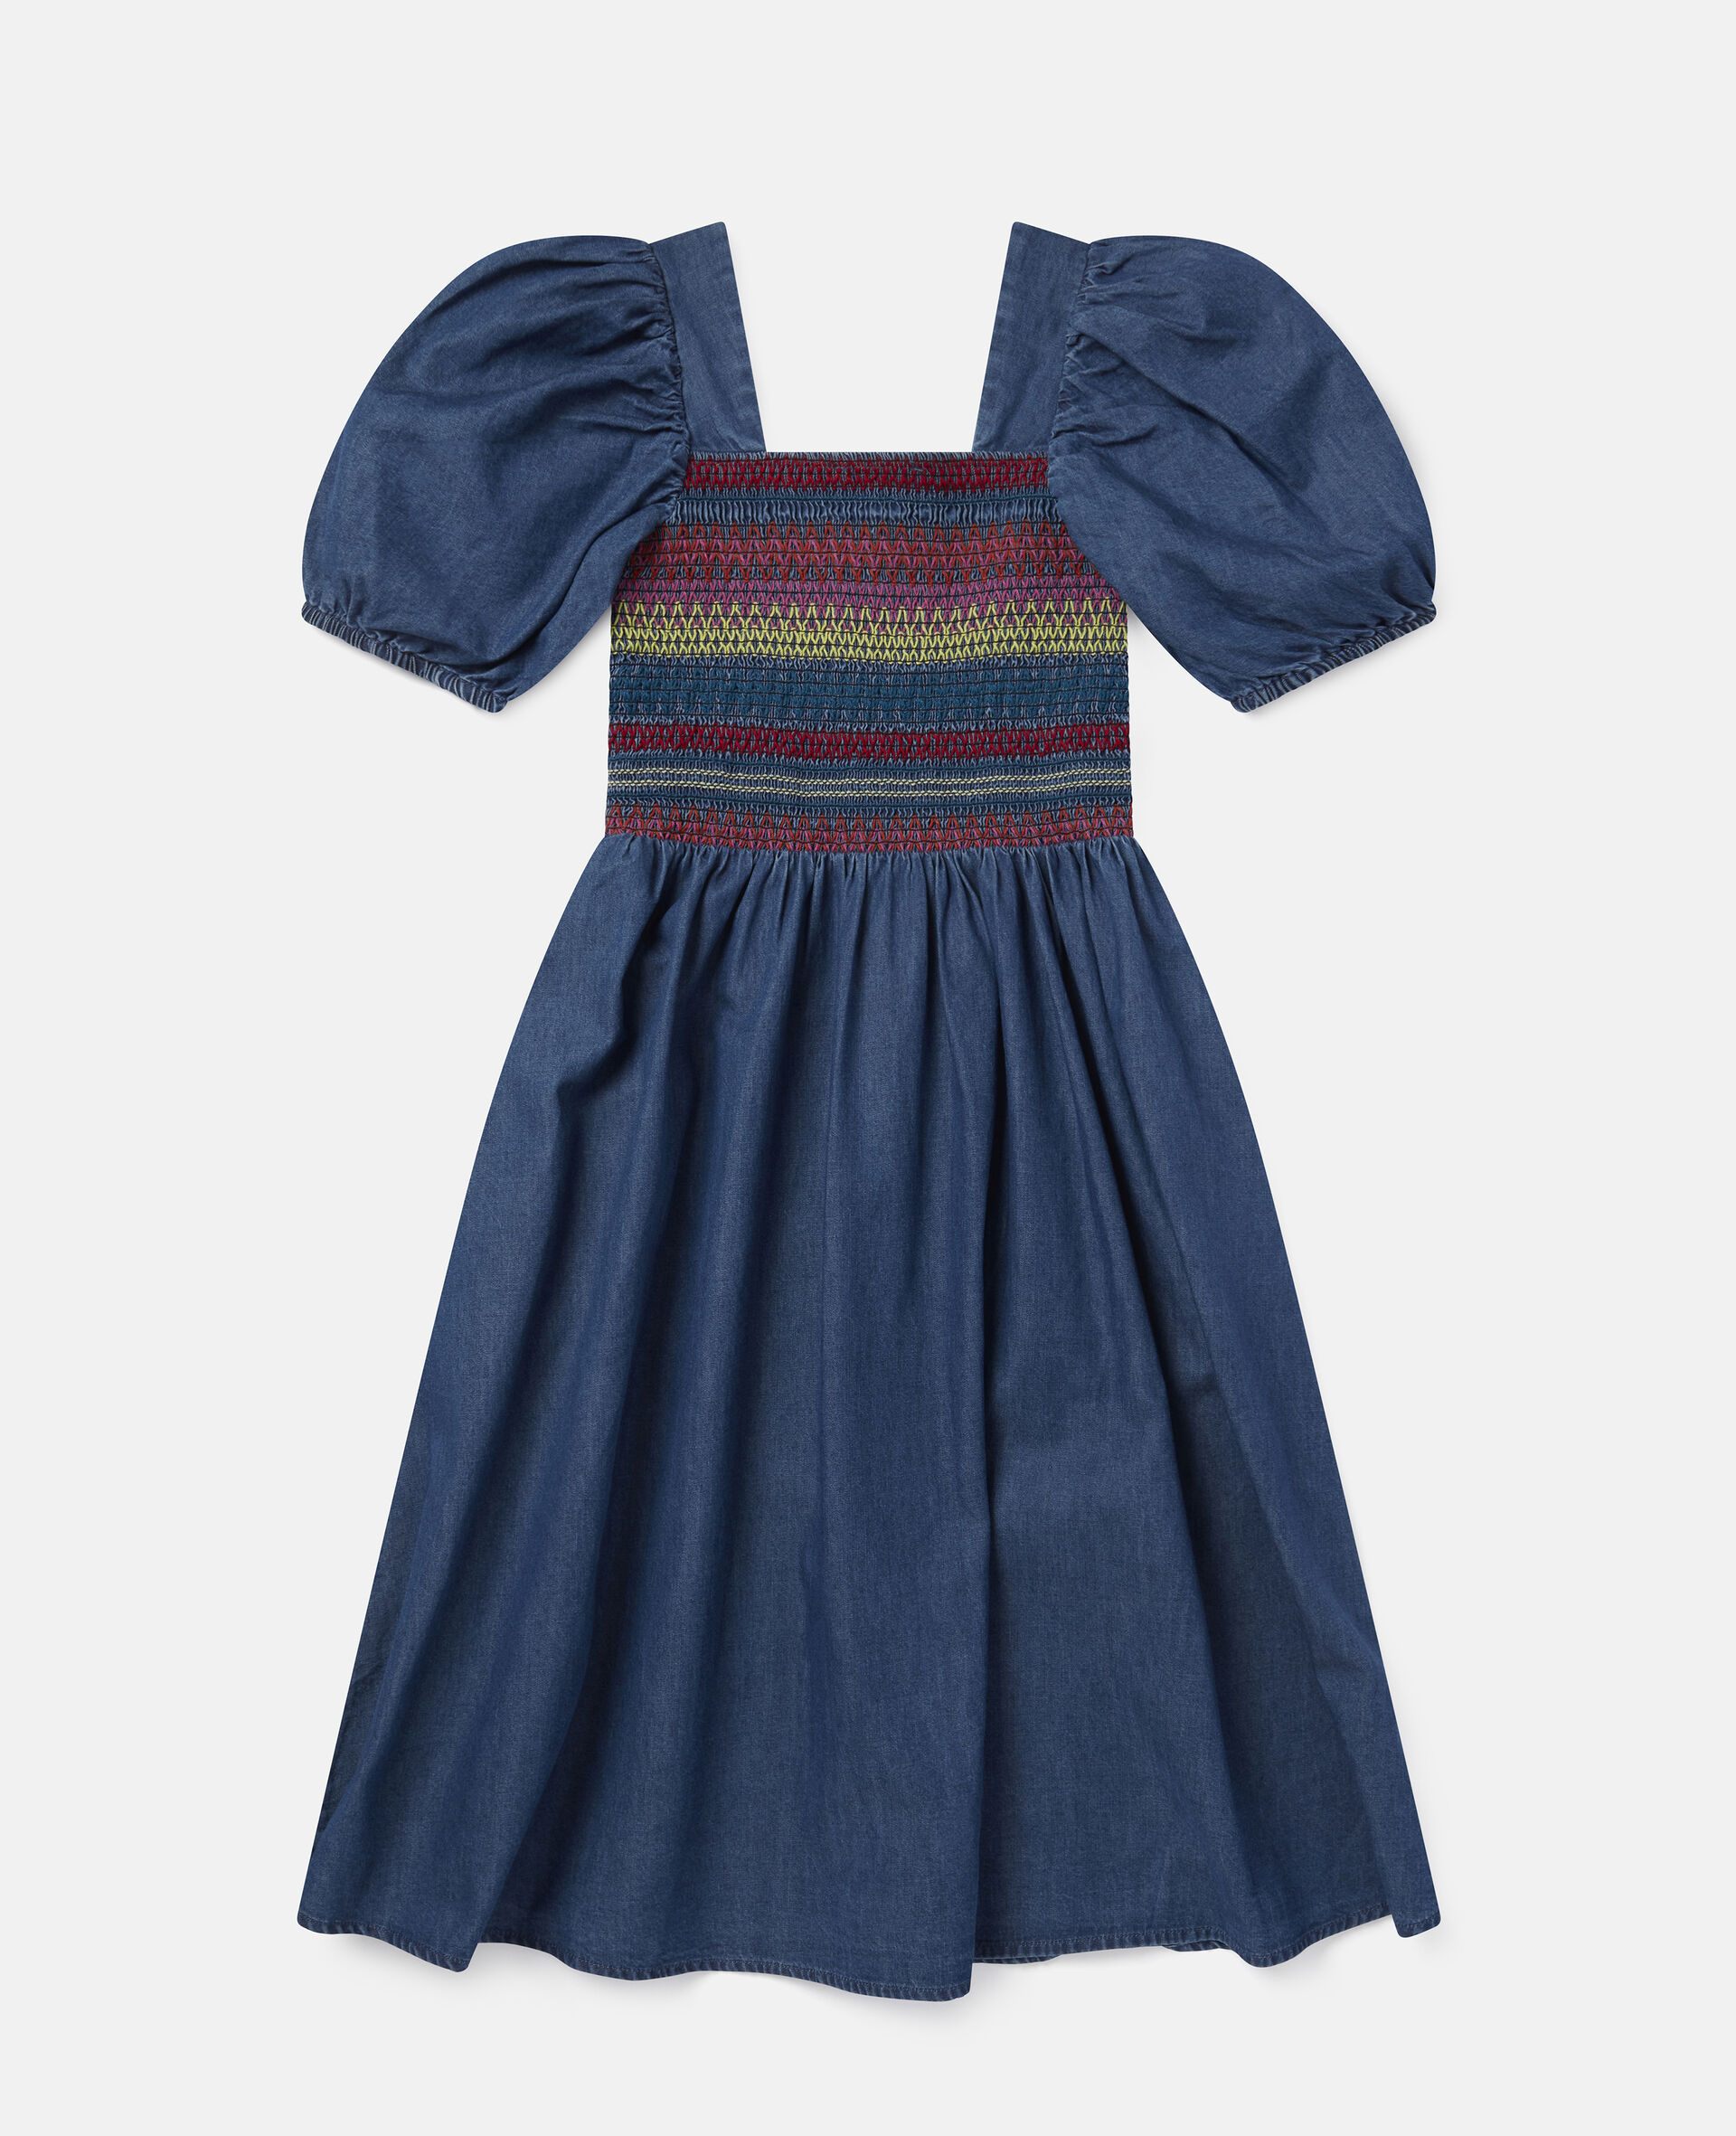 Embroidered Chambray Dress-Blue-large image number 2